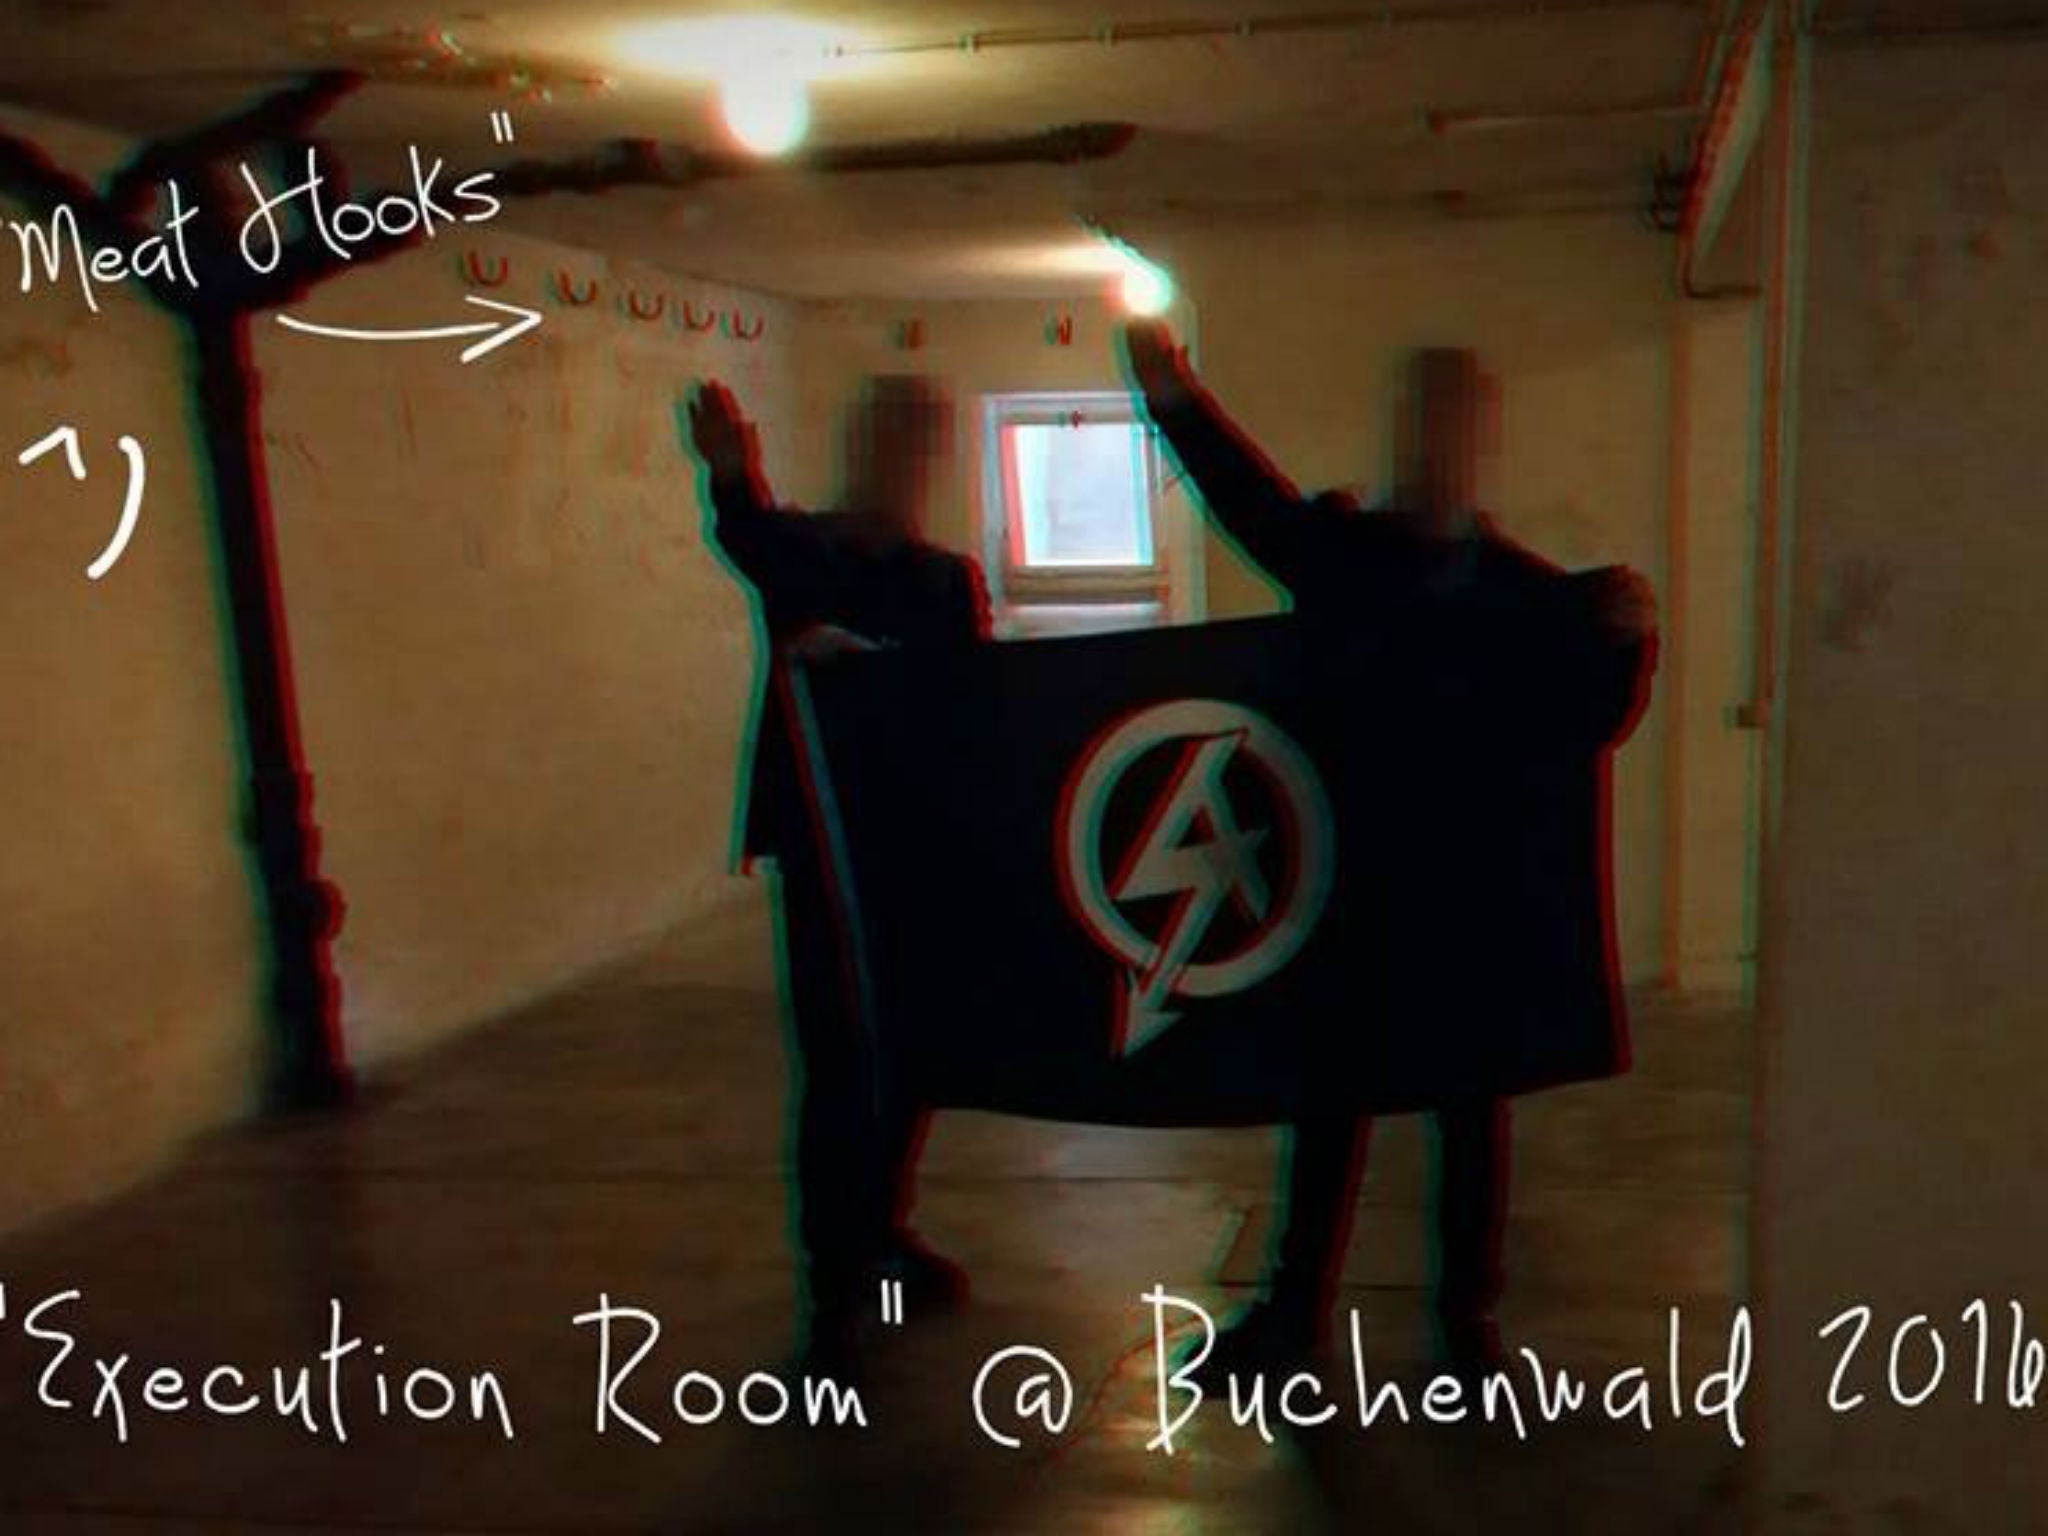 National Action shared a photo of Alex Davies and another member performing Hitler salutes at a Nazi concentration camp